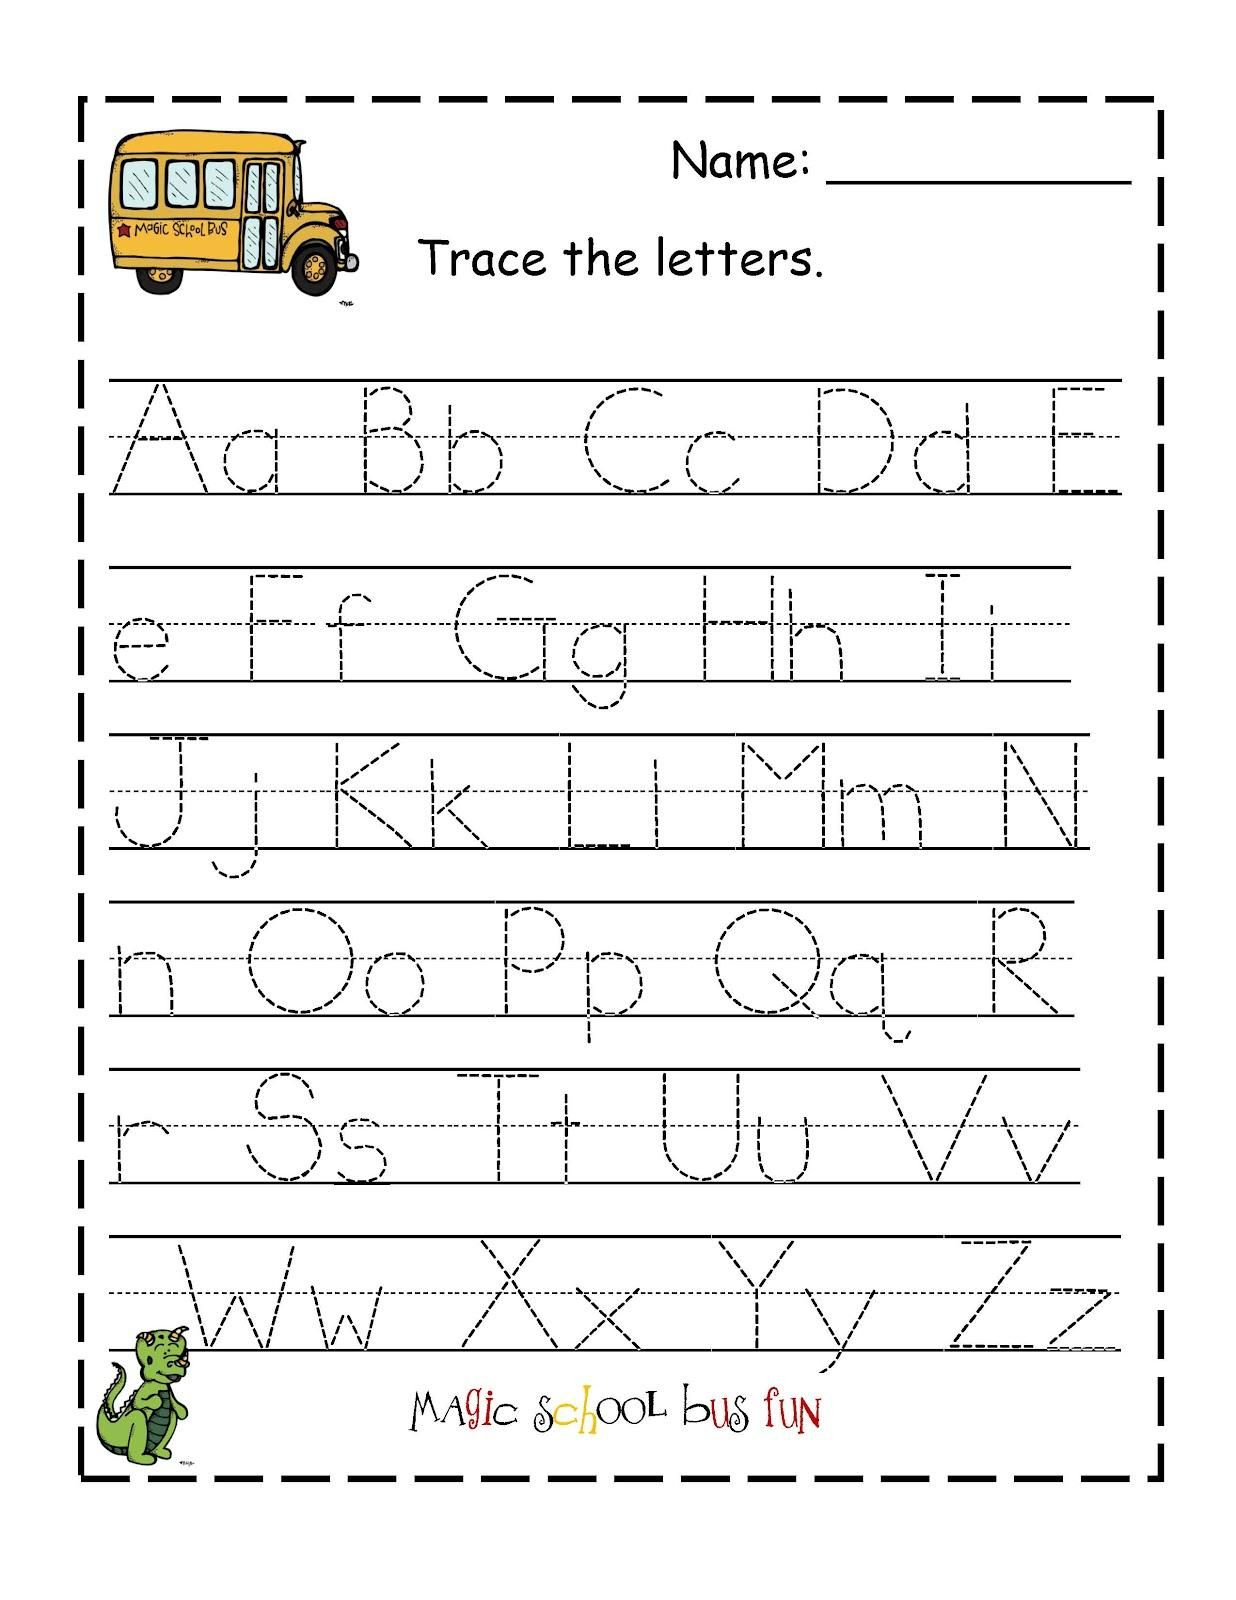 Free Printable Abc Tracing Worksheets #2 | Places To Visit - Free | Letter Tracing Worksheets Free Printable